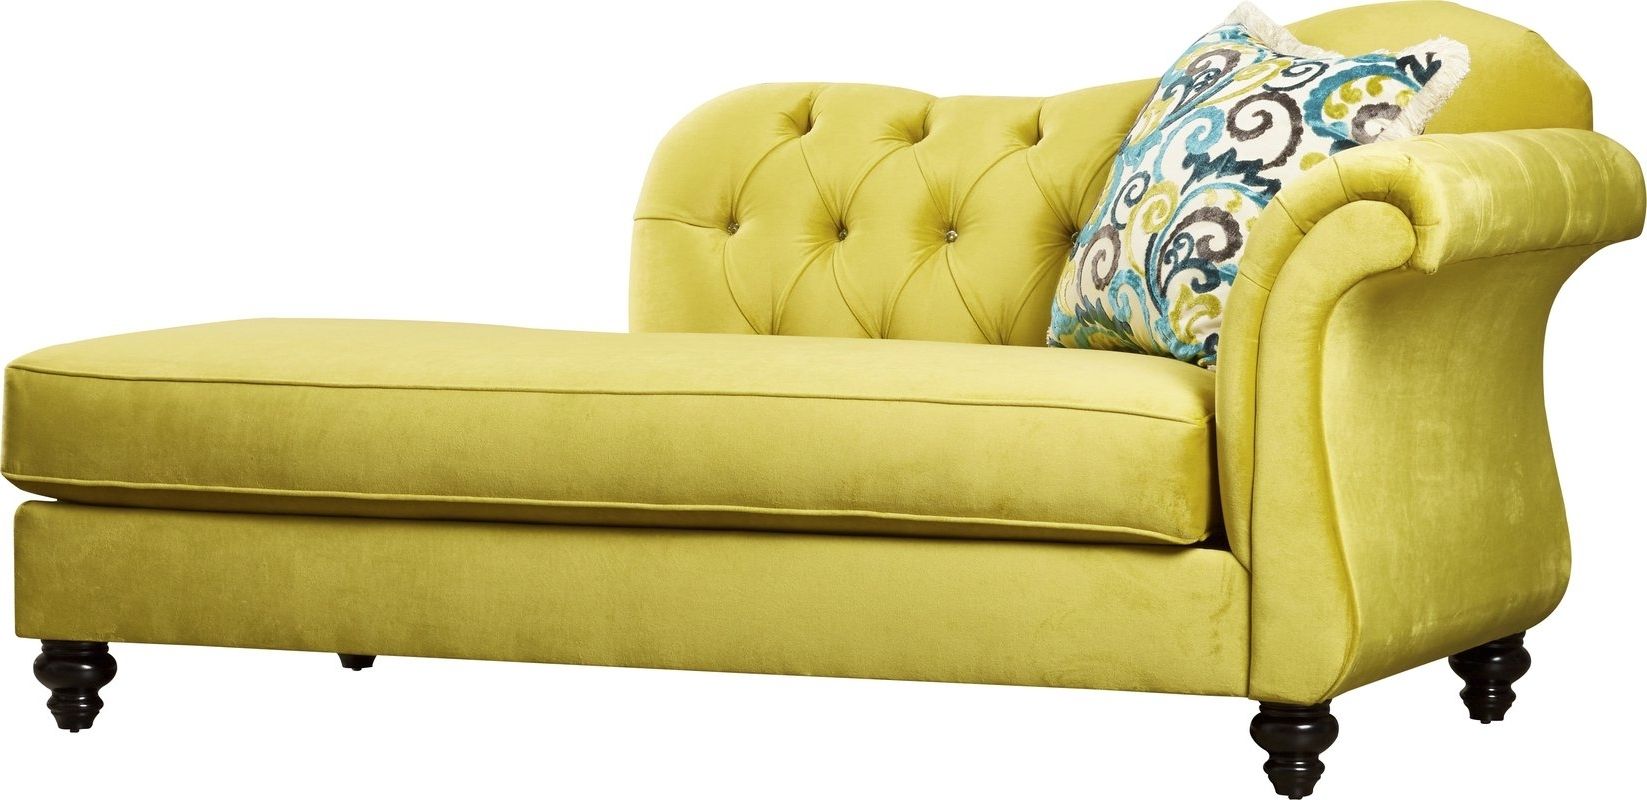 Most Recent Yellow Chaises Intended For Mistana Marla Chaise Lounge & Reviews (View 12 of 15)